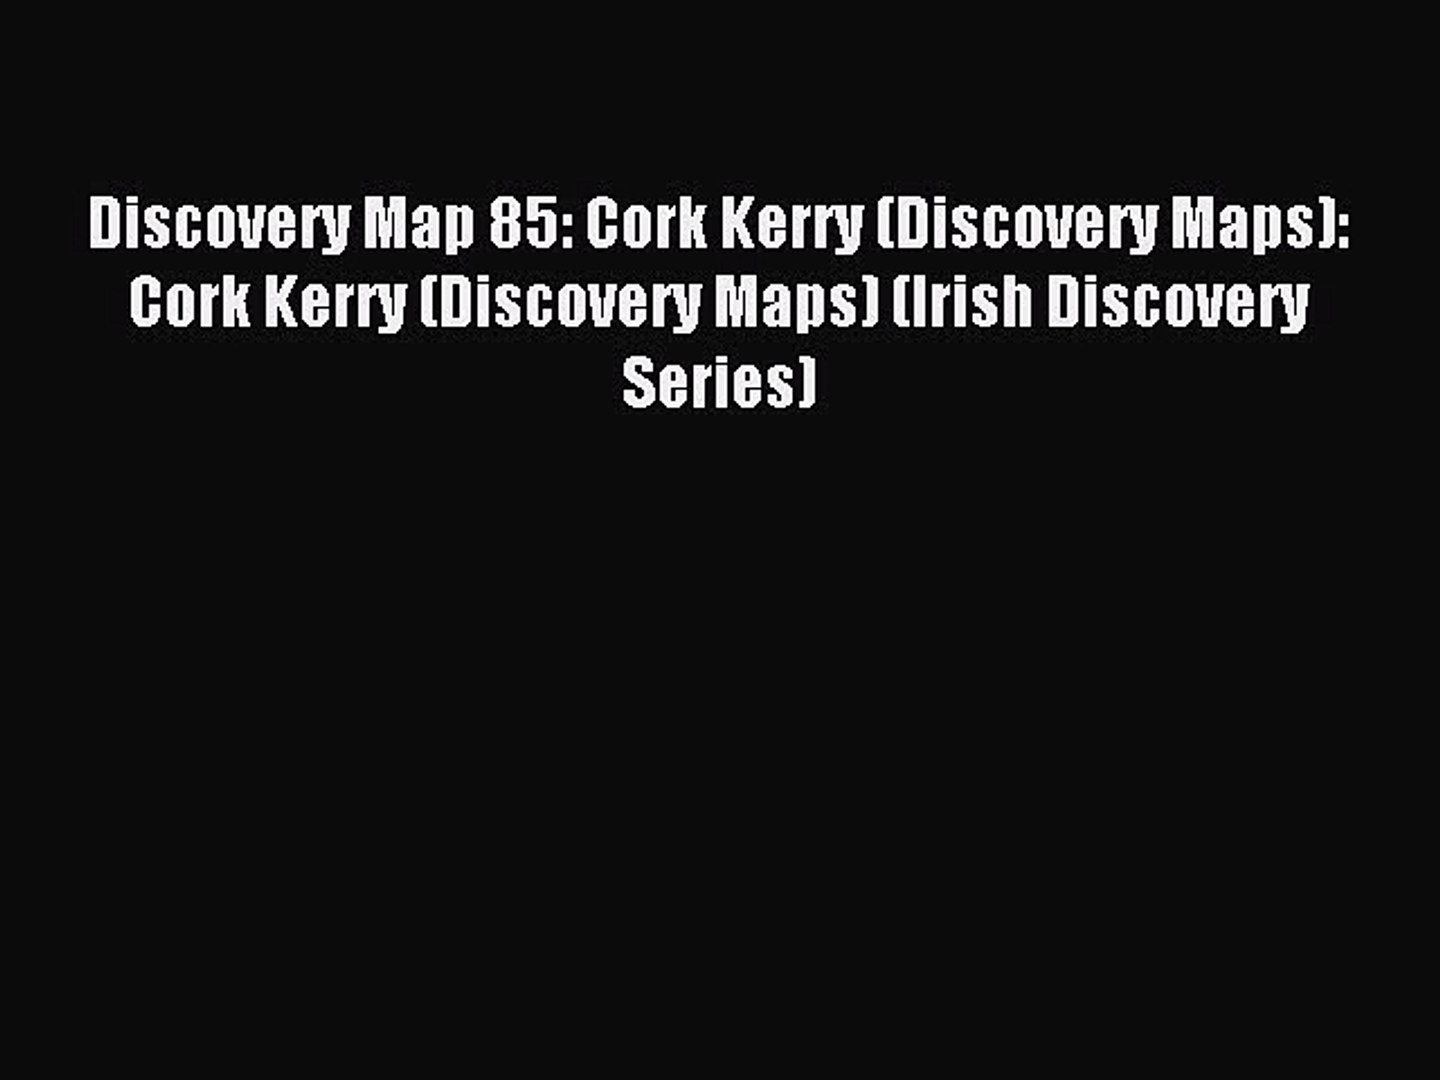 Download Discovery Map 85: Cork Kerry (Discovery Maps): Cork Kerry (Discovery Maps) (Irish